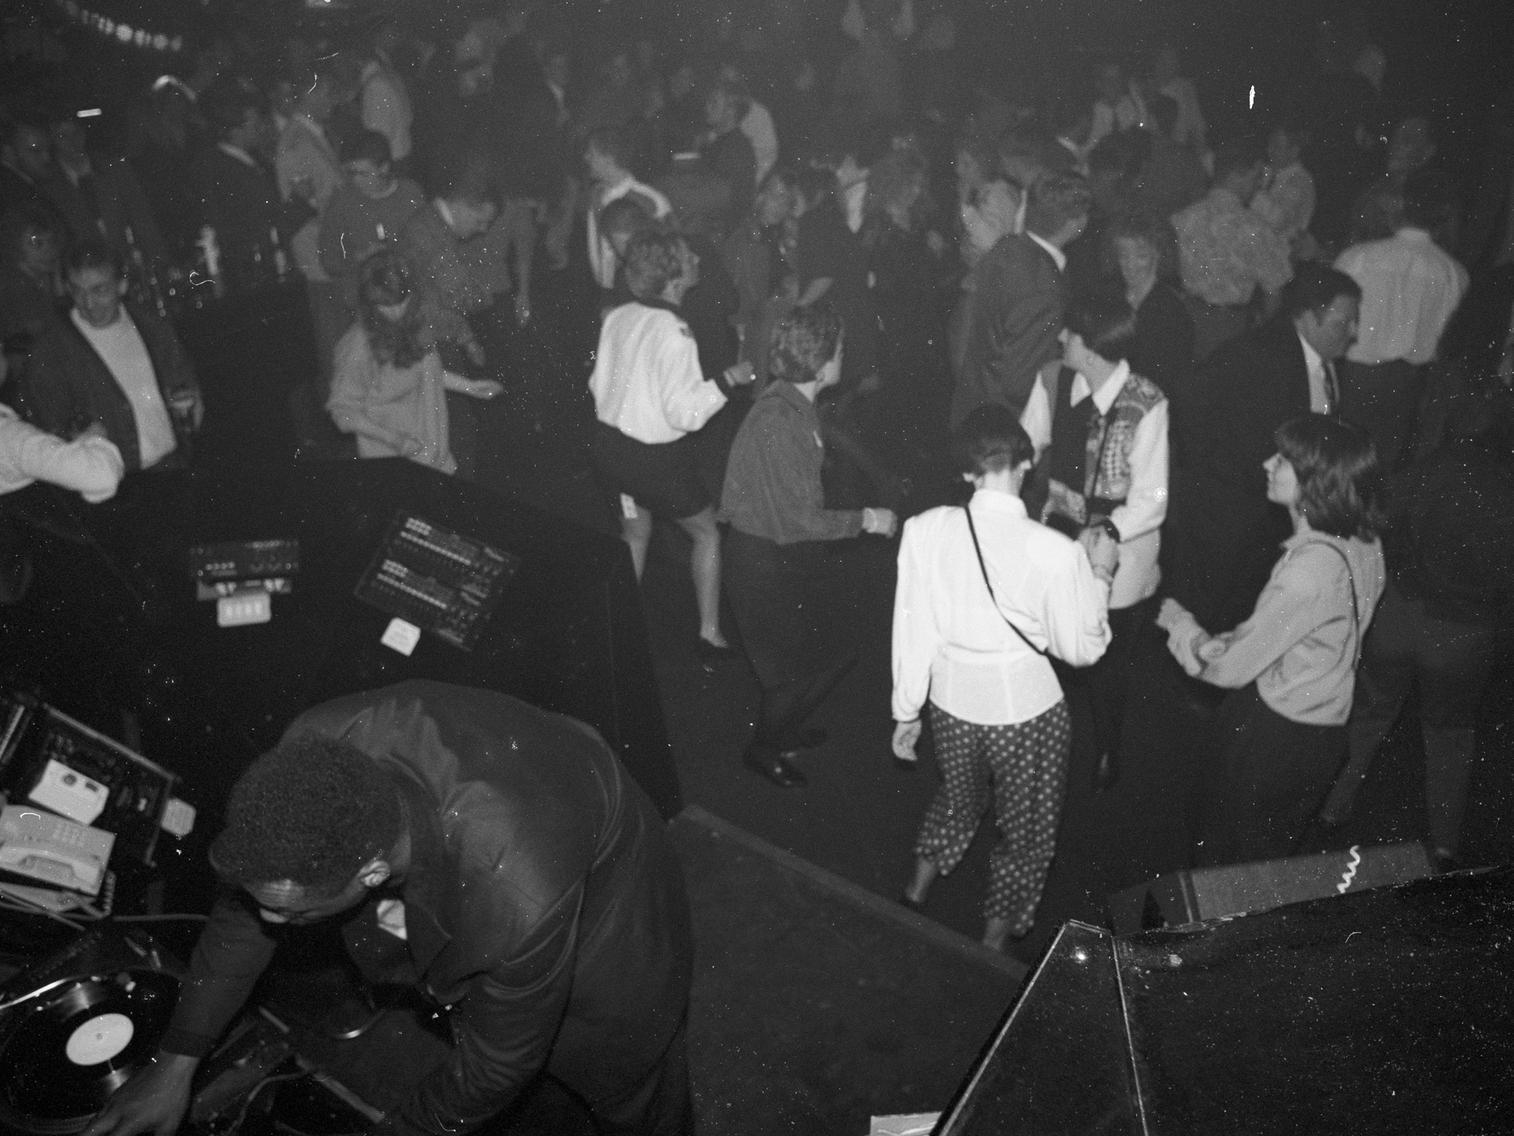 Do you know which nightclub this photo was taken in?